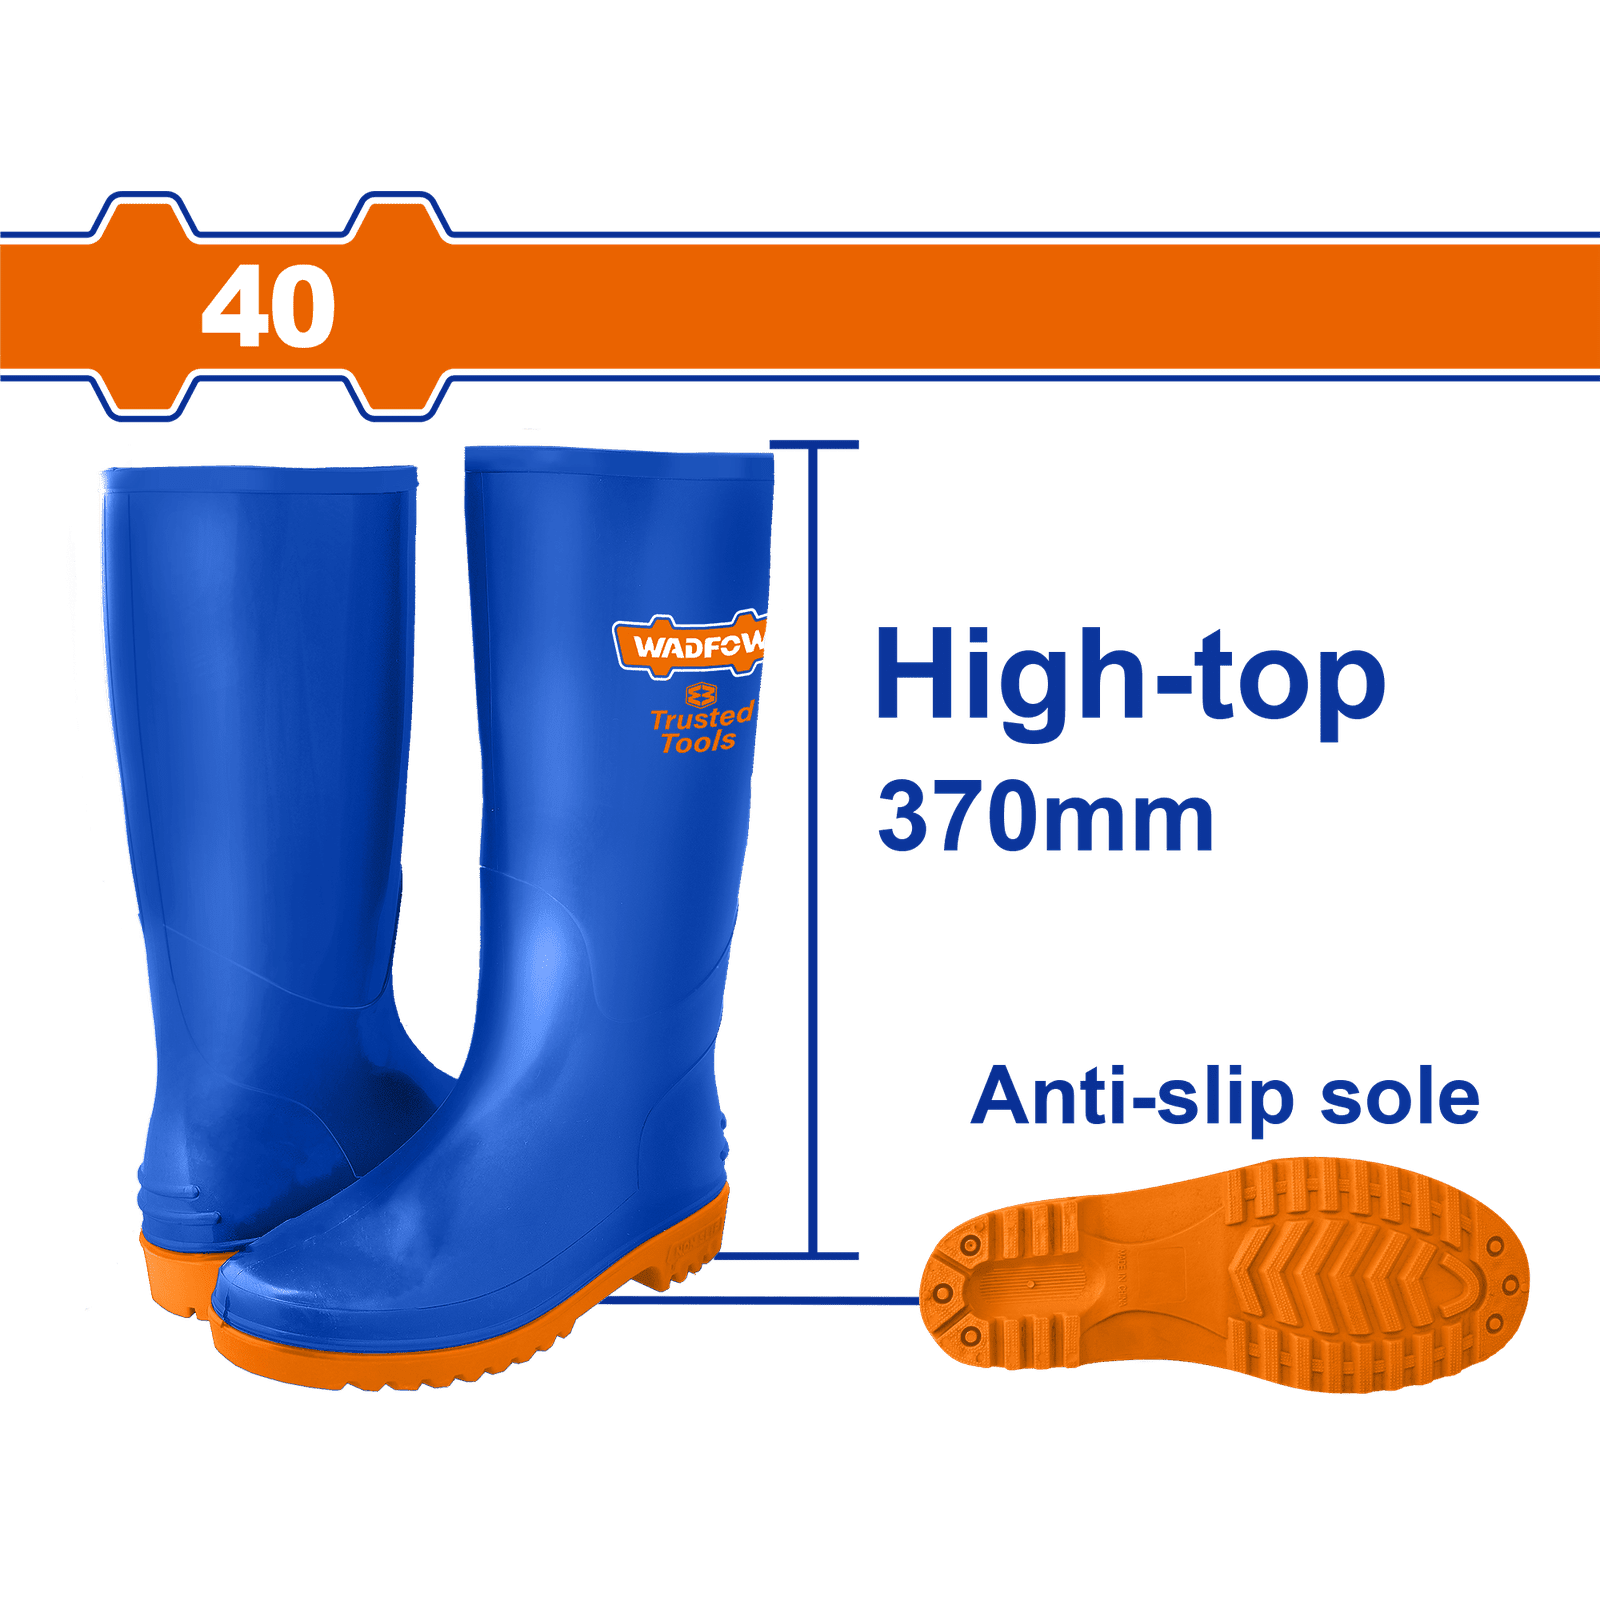 Shop Wadfow Rain Wellington Boots Online in Accra, Ghana | Supply Master Boots & Footwear Buy Tools hardware Building materials